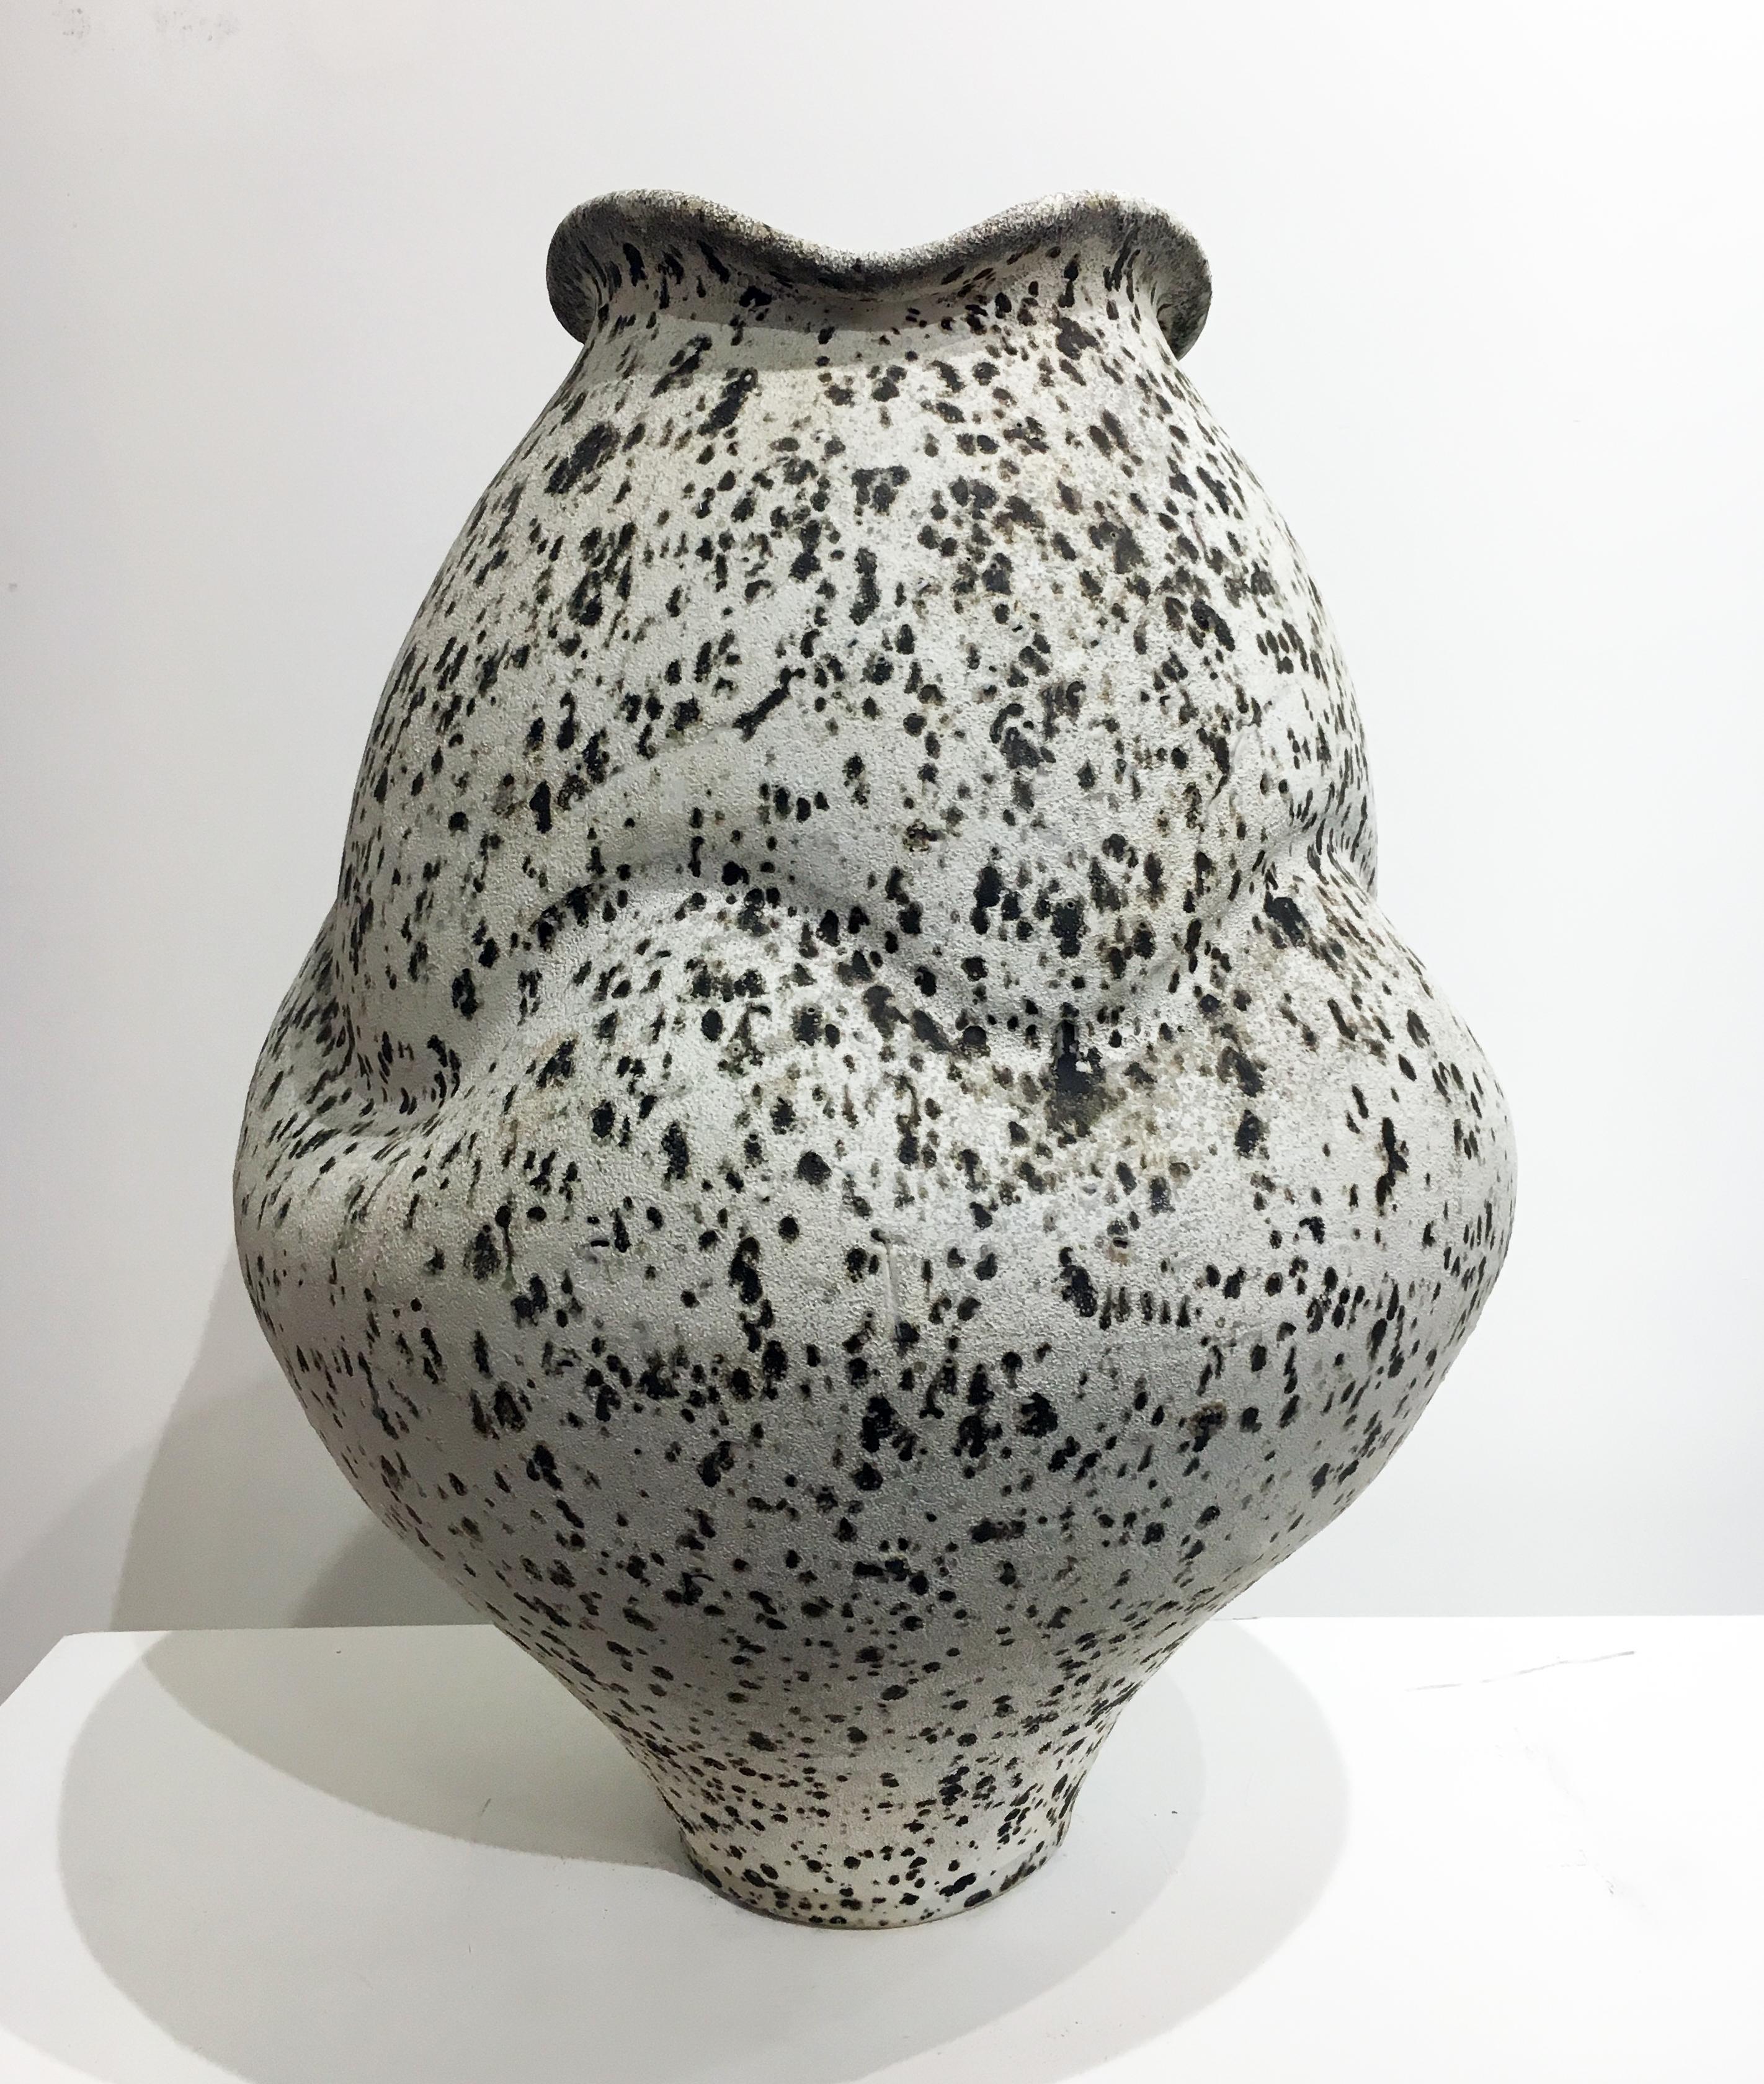 Contemporary Design, Ceramic Jar, Wood Fire Porcelain, Iron Particles, Glaze - Sculpture by Perry Haas